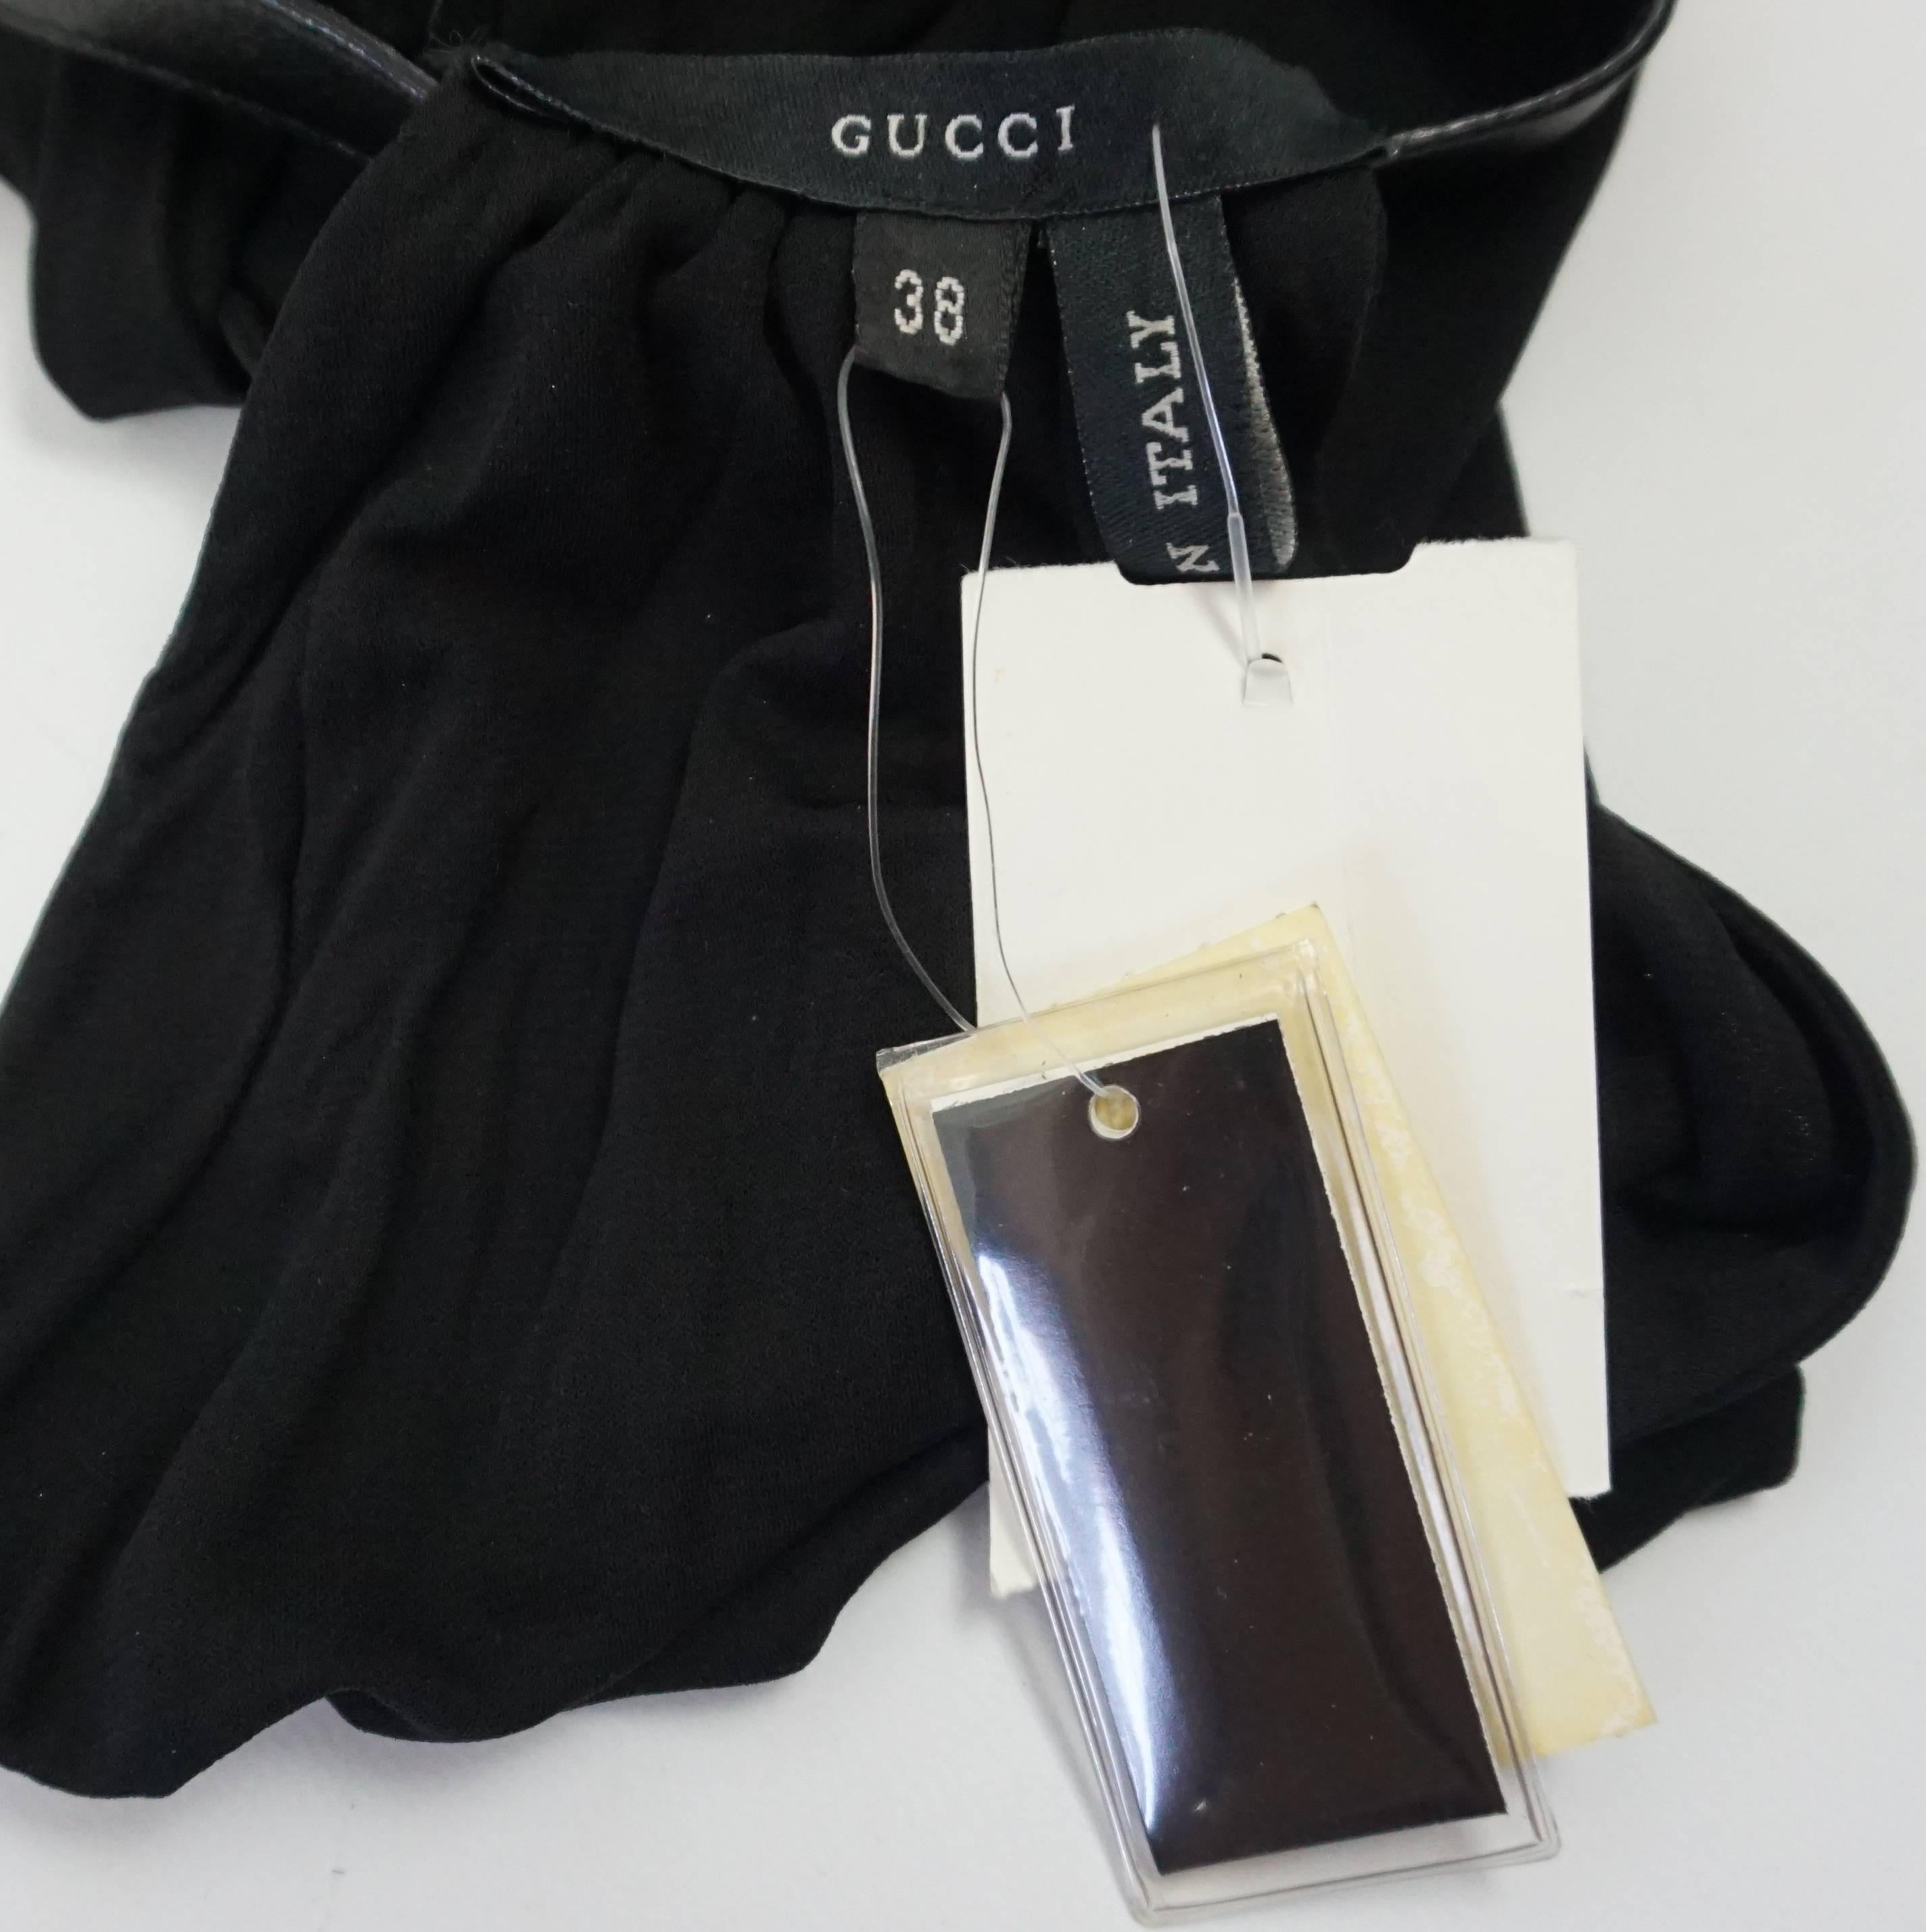 Gucci Black Jersey Halter Top with Leather  - 38  1